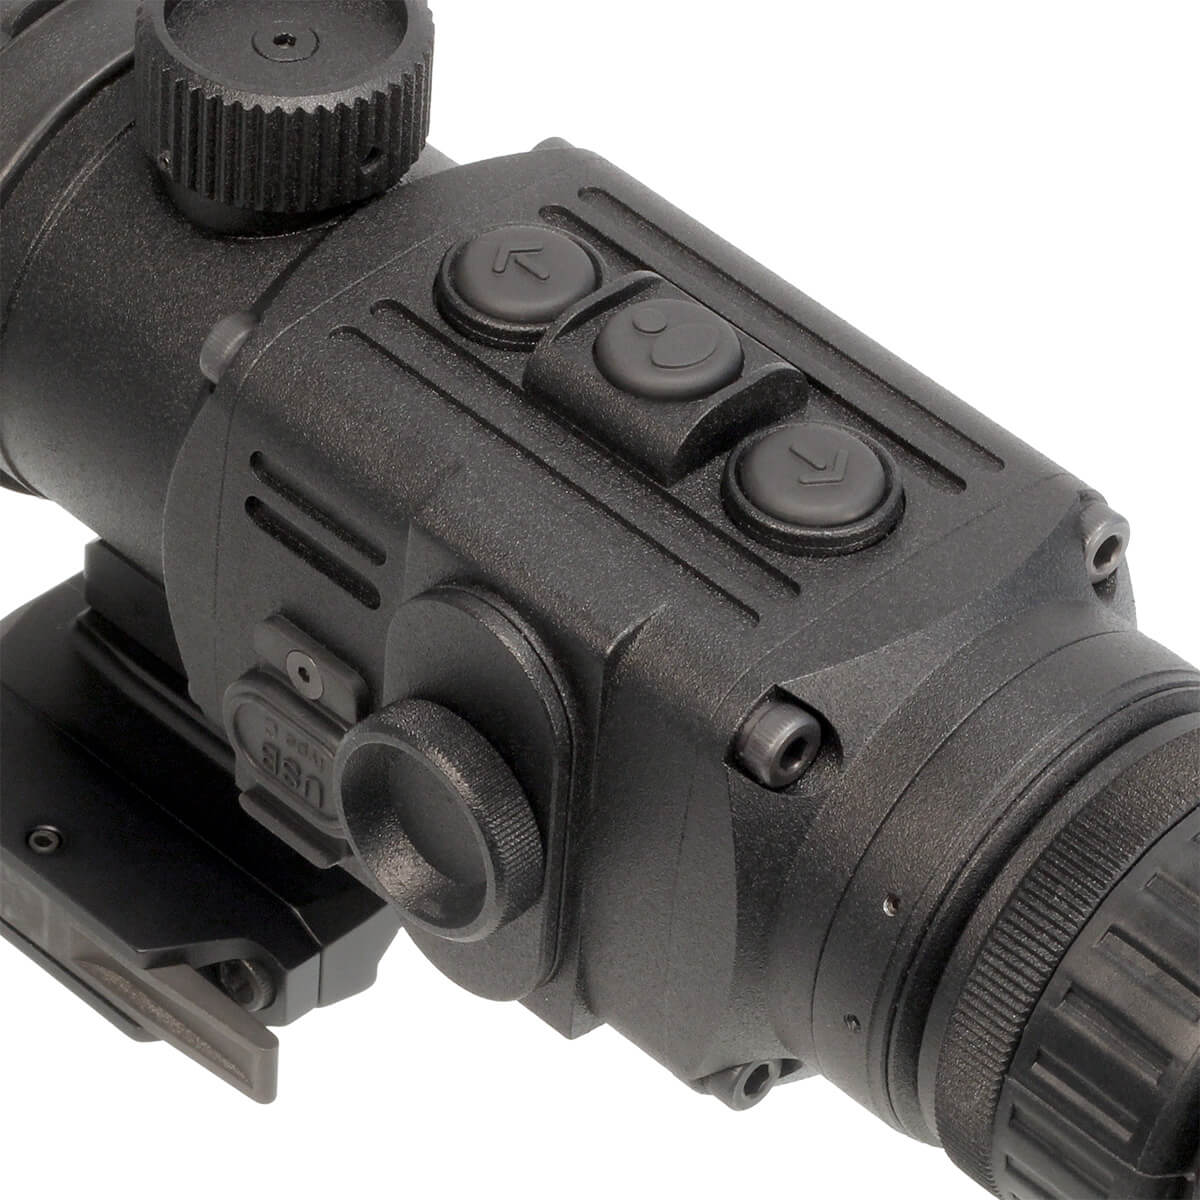 Thermal Scope | Thermal Scope Boarmaster 40 | TS100